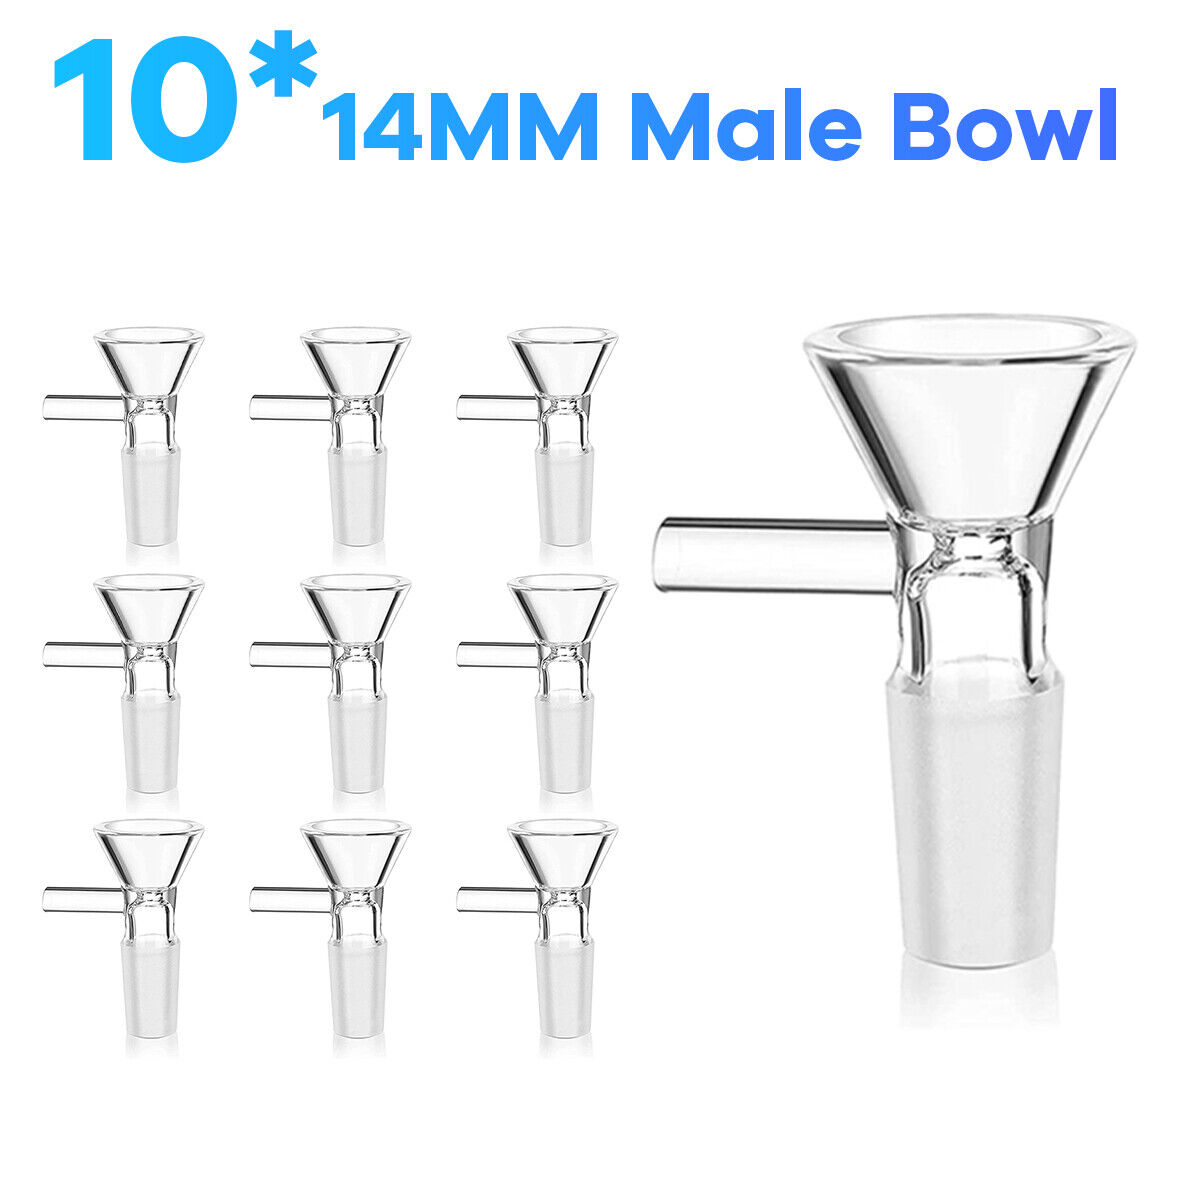 10x 14MM Male Glass Bowl For Water Pipe Hookah Bong Replacement Head - US Prime